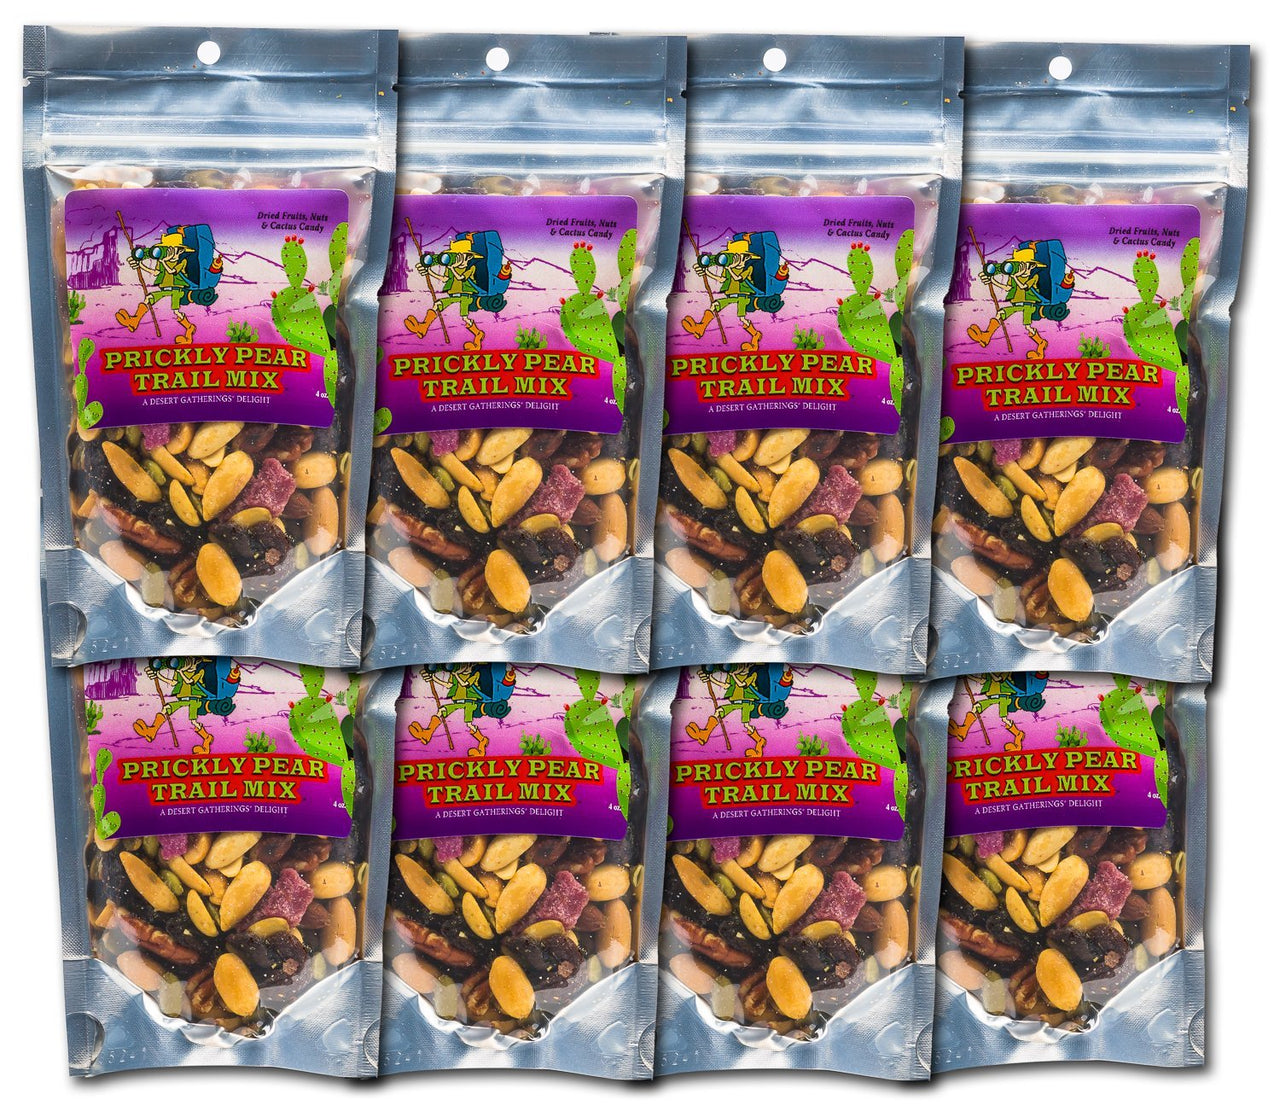 Prickly Pear Trail Mix (8 Pack /4oz per packet) - Desert Gatherings